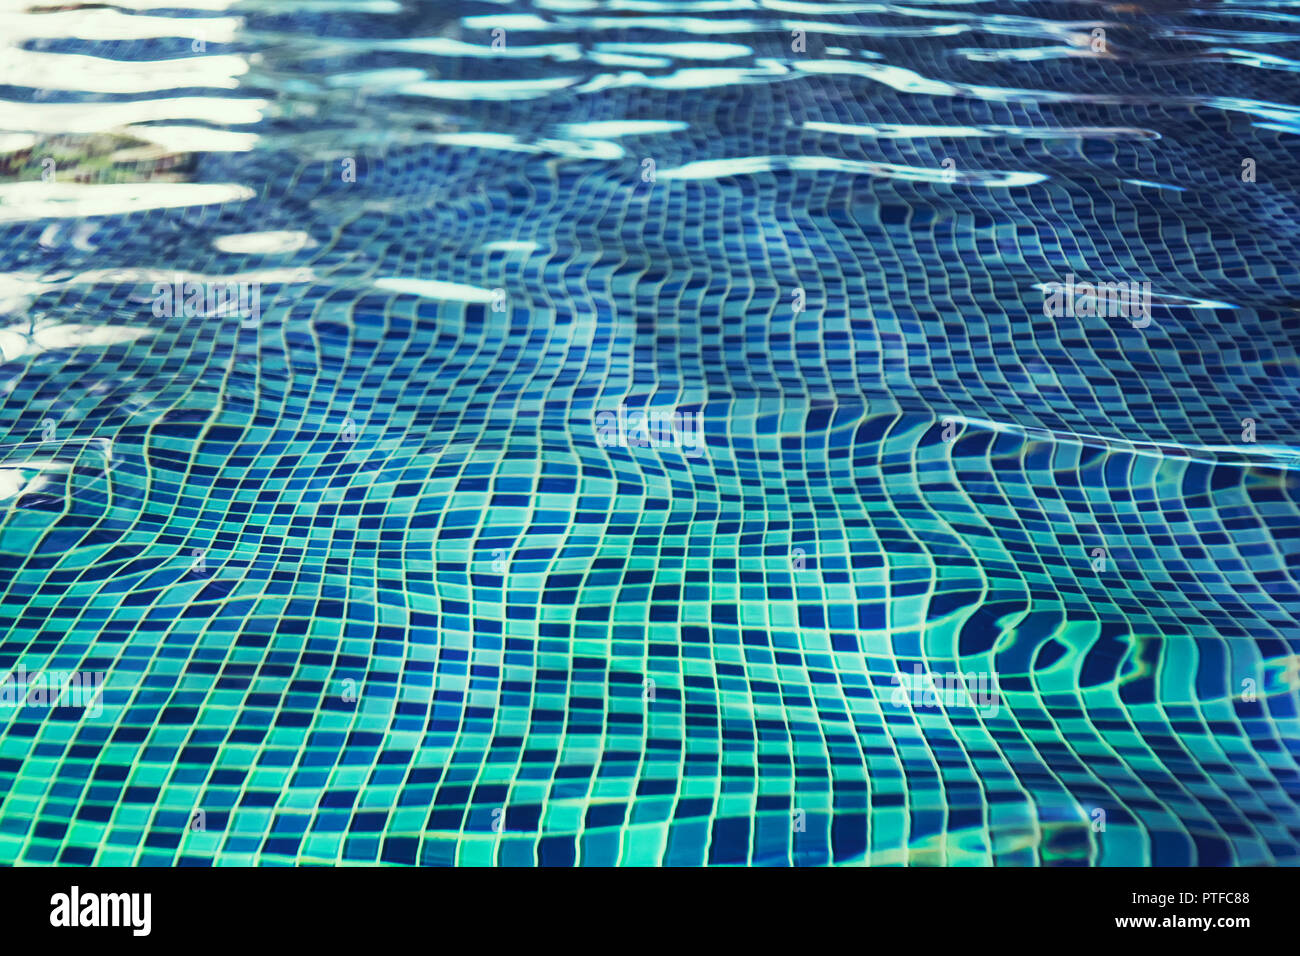 A fish eye effect of indoor pool rippling water at the blue-tiled mosaic floor. Waving of clean water in swimming pool with tiled floor. Swinging of w Stock Photo